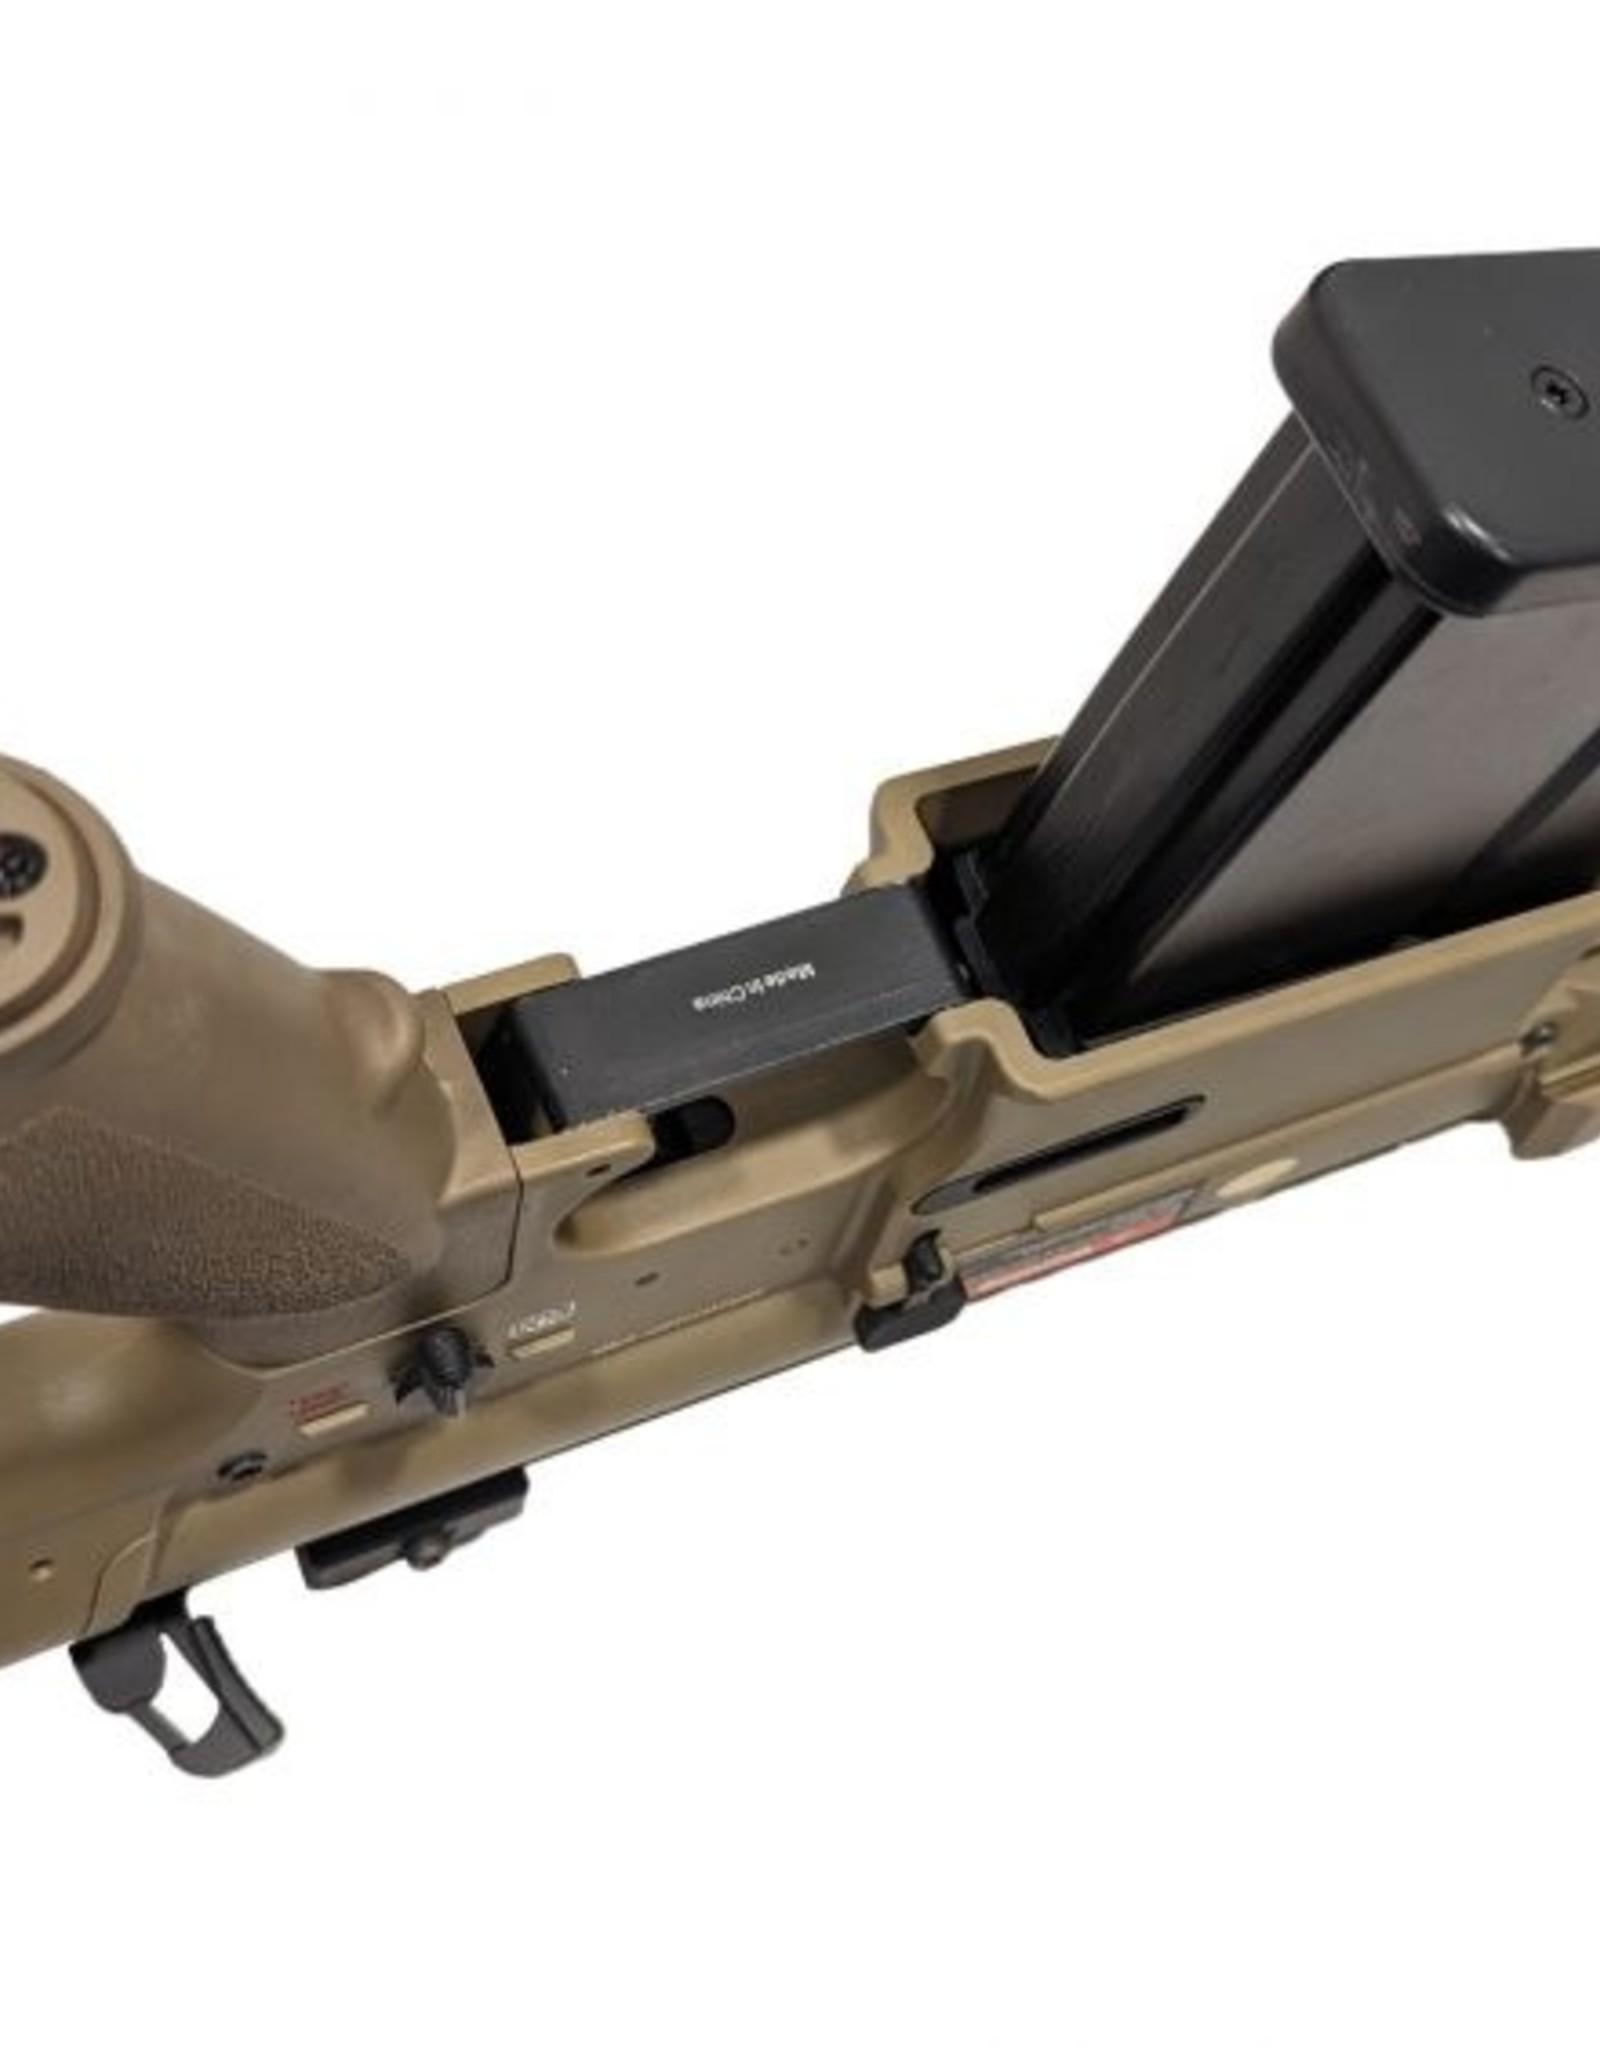 GOLDEN EAGLE Golden Eagle 417 AEG Rifle with Mosfet (Polymer - E6906T - Tan)